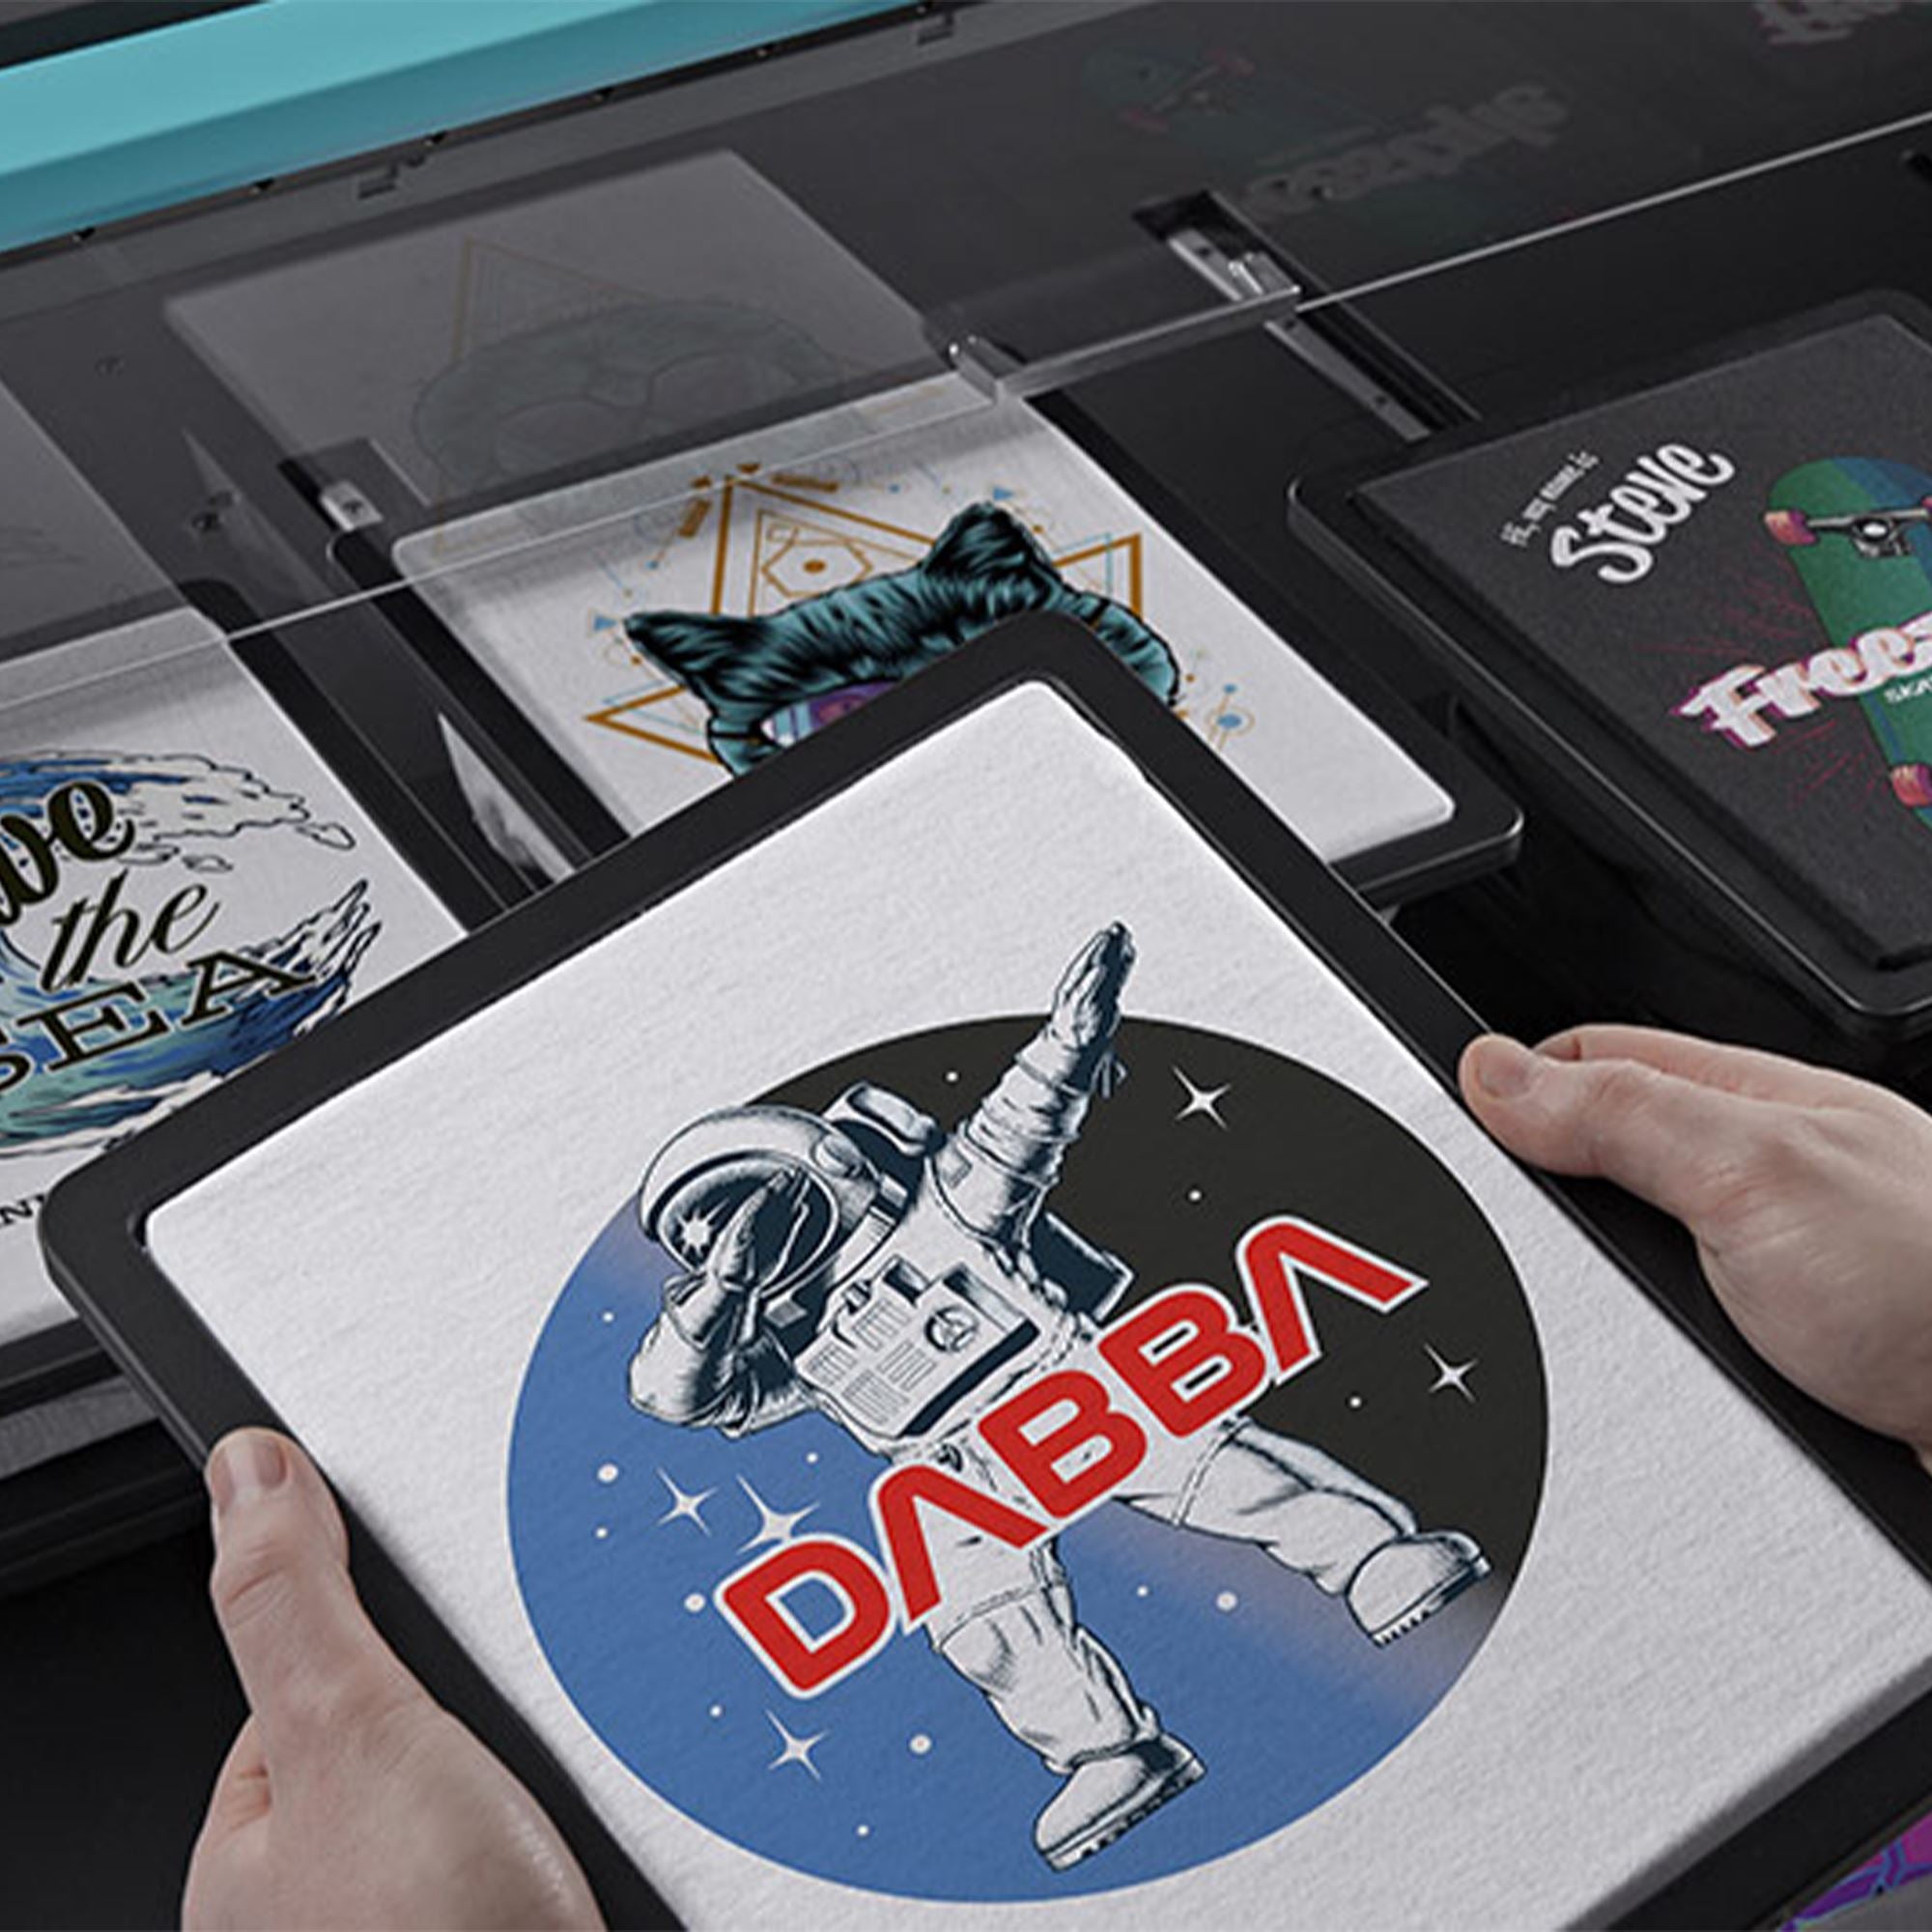 Roland Introduces New Direct-to-Garment Printer - Sign Builder Illustrated,  The How-To Sign Industry Magazine